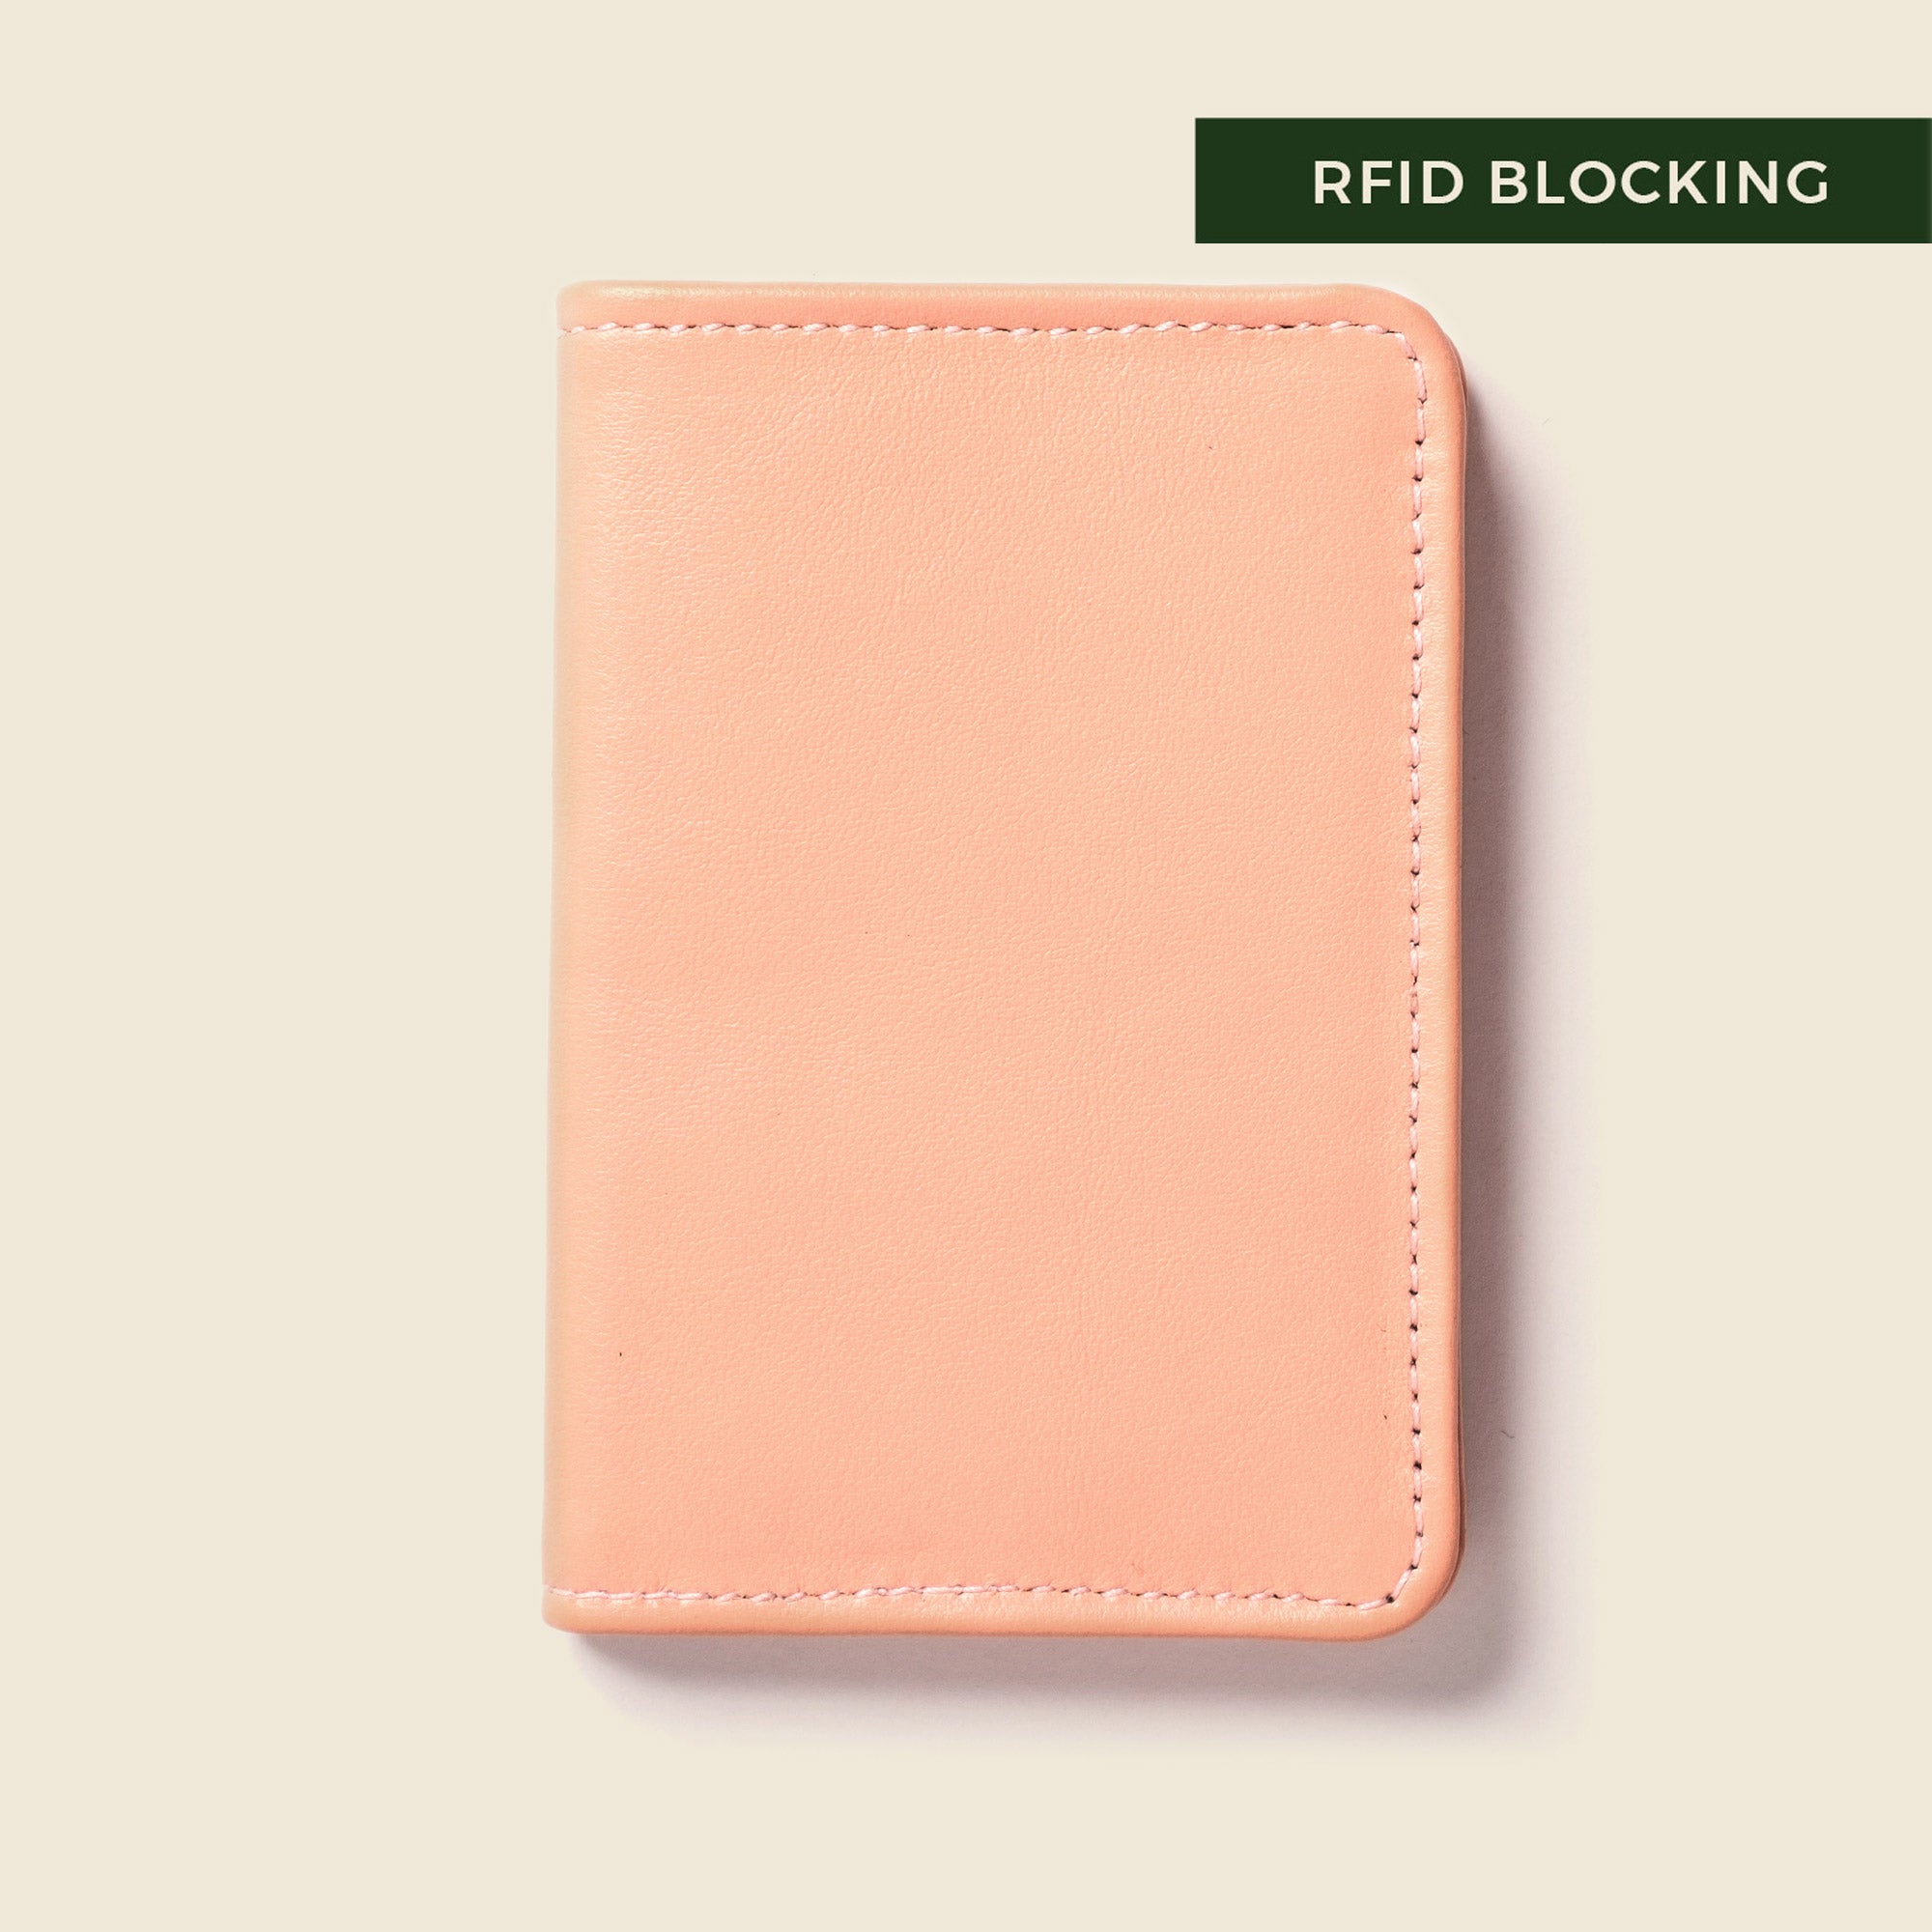 Light pink leather bifold wallet for cards and cash for women